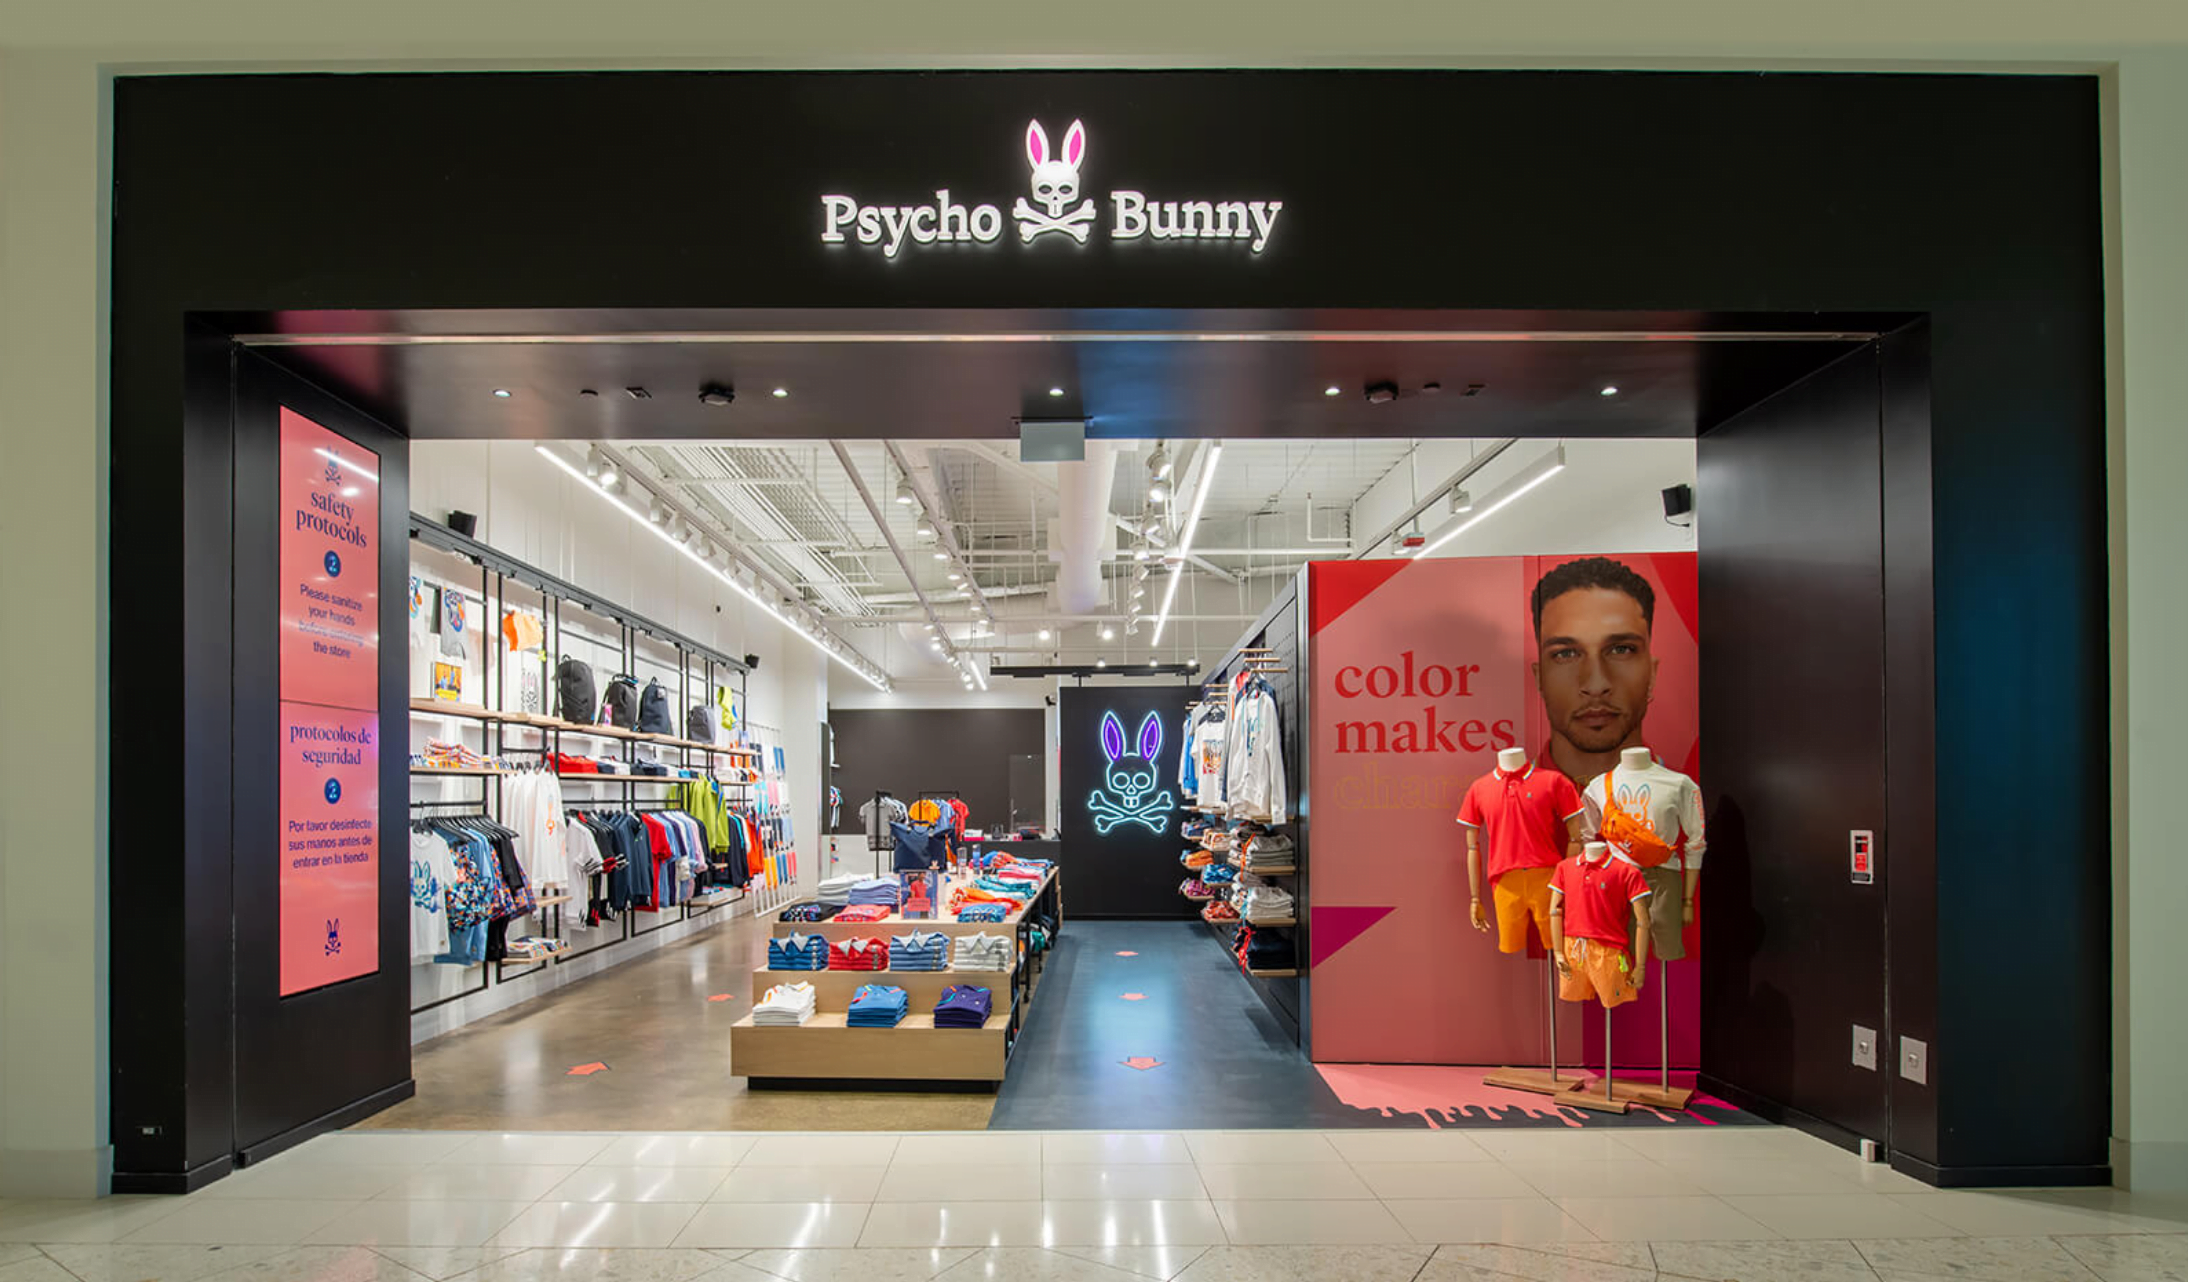 Edgy Men's Fashion Brand 'Psycho Bunny' to Open Canadian Stores